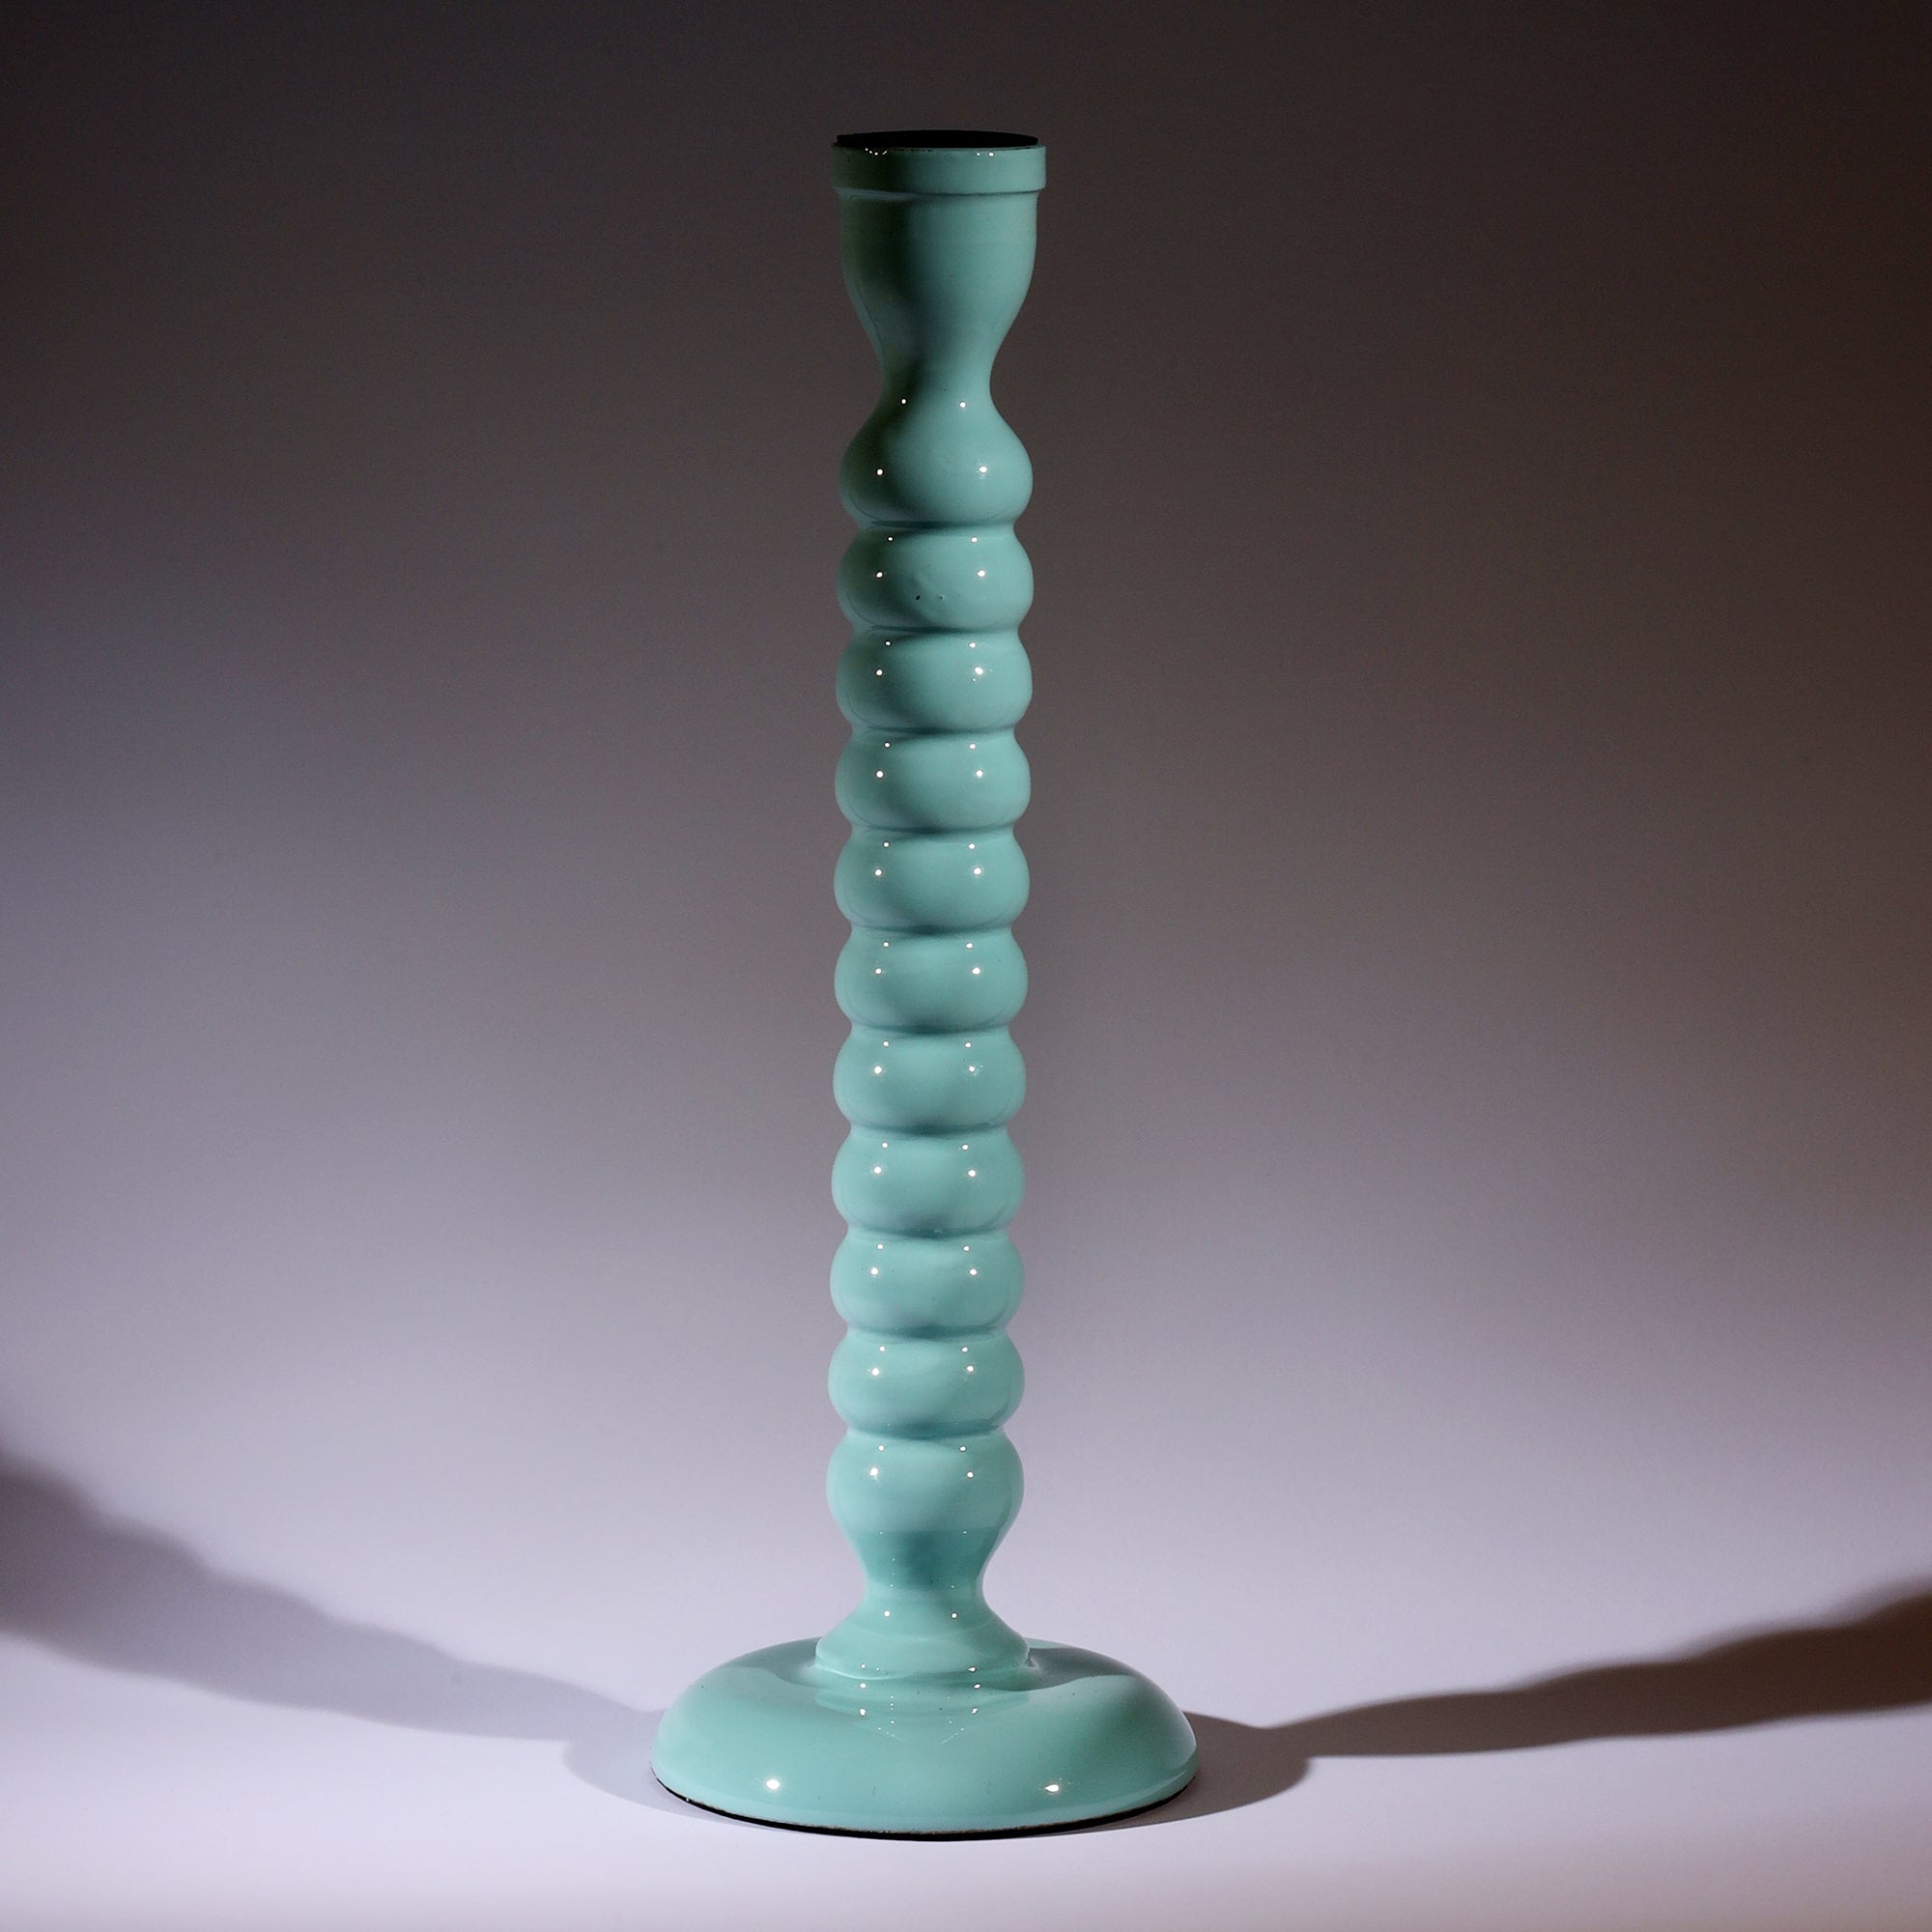 Seashell Blue Polished Lacquer Candle holder,it is twisted all the way down like a corkscrew tapered at the bottom.